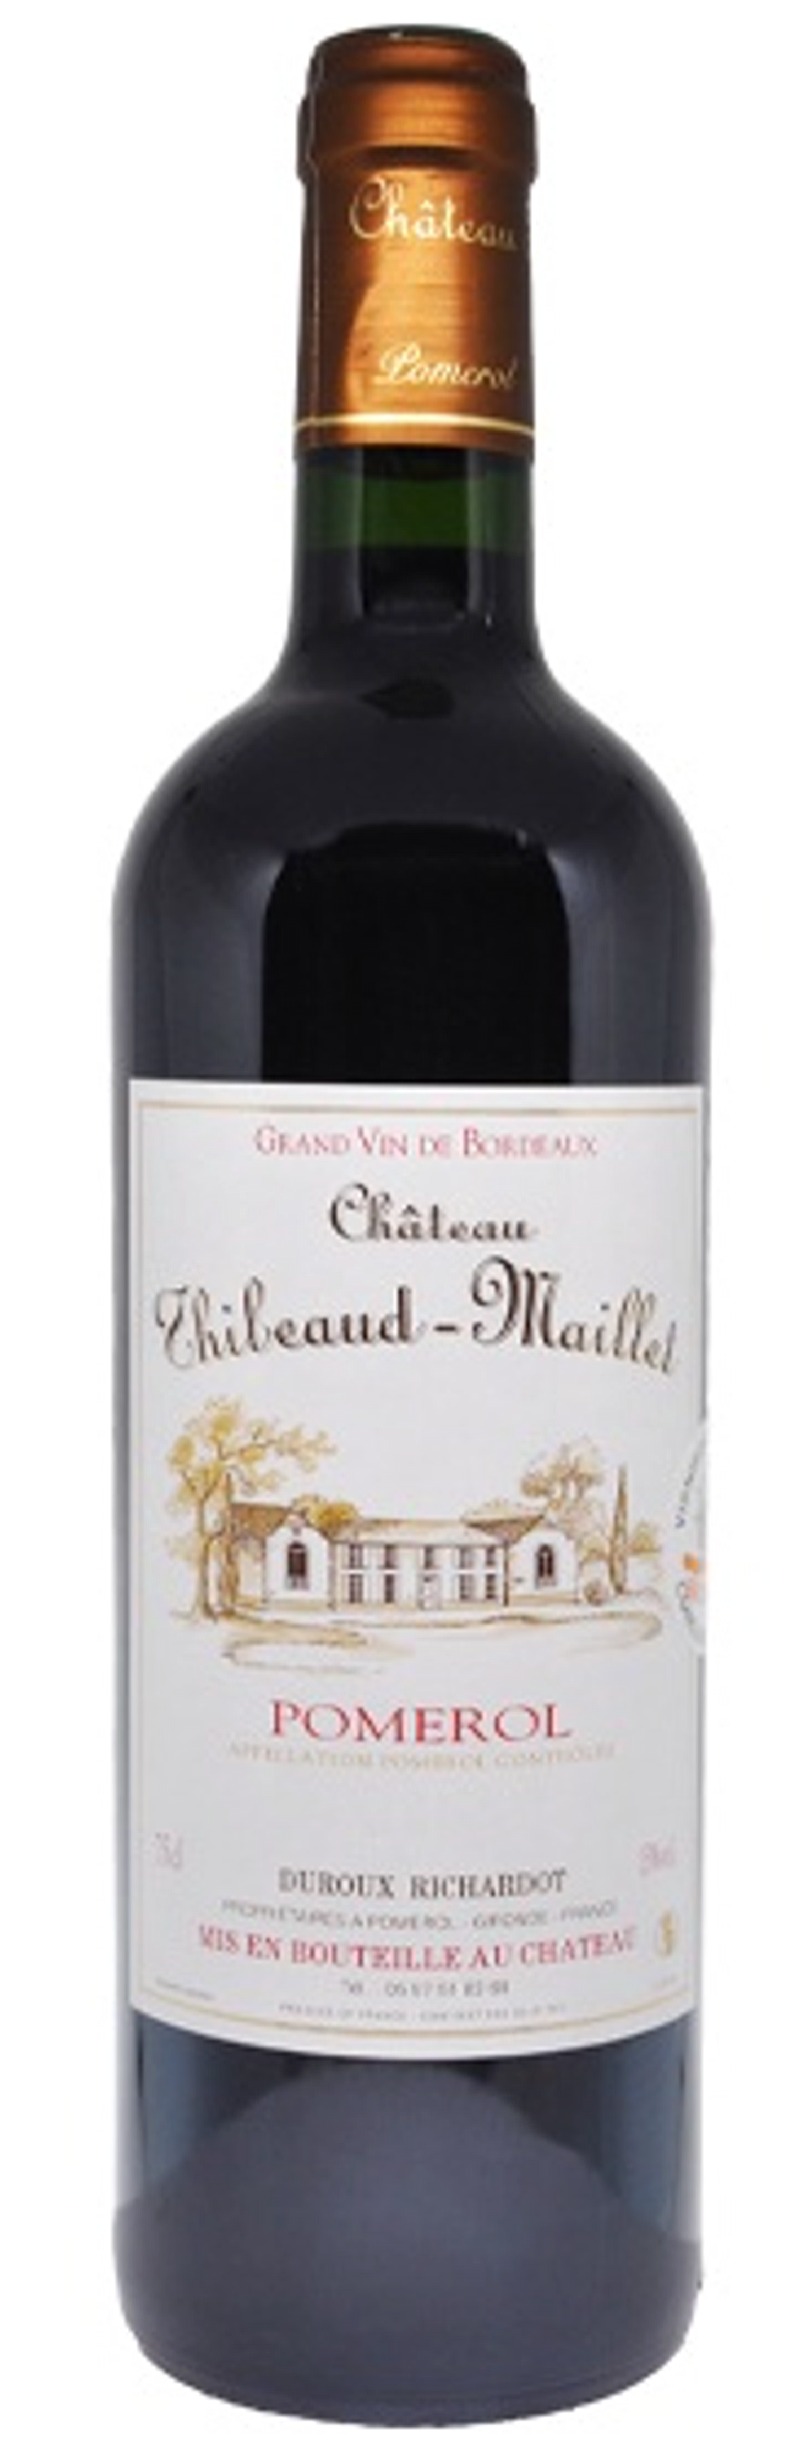 Thibeaud-Maillet Pomerol 2019 | Order Wines Cabernet Chardonnay Wines Savignon from - Wines Wines - California - the Timeless - French United - - Spanish Port Wine States Online 